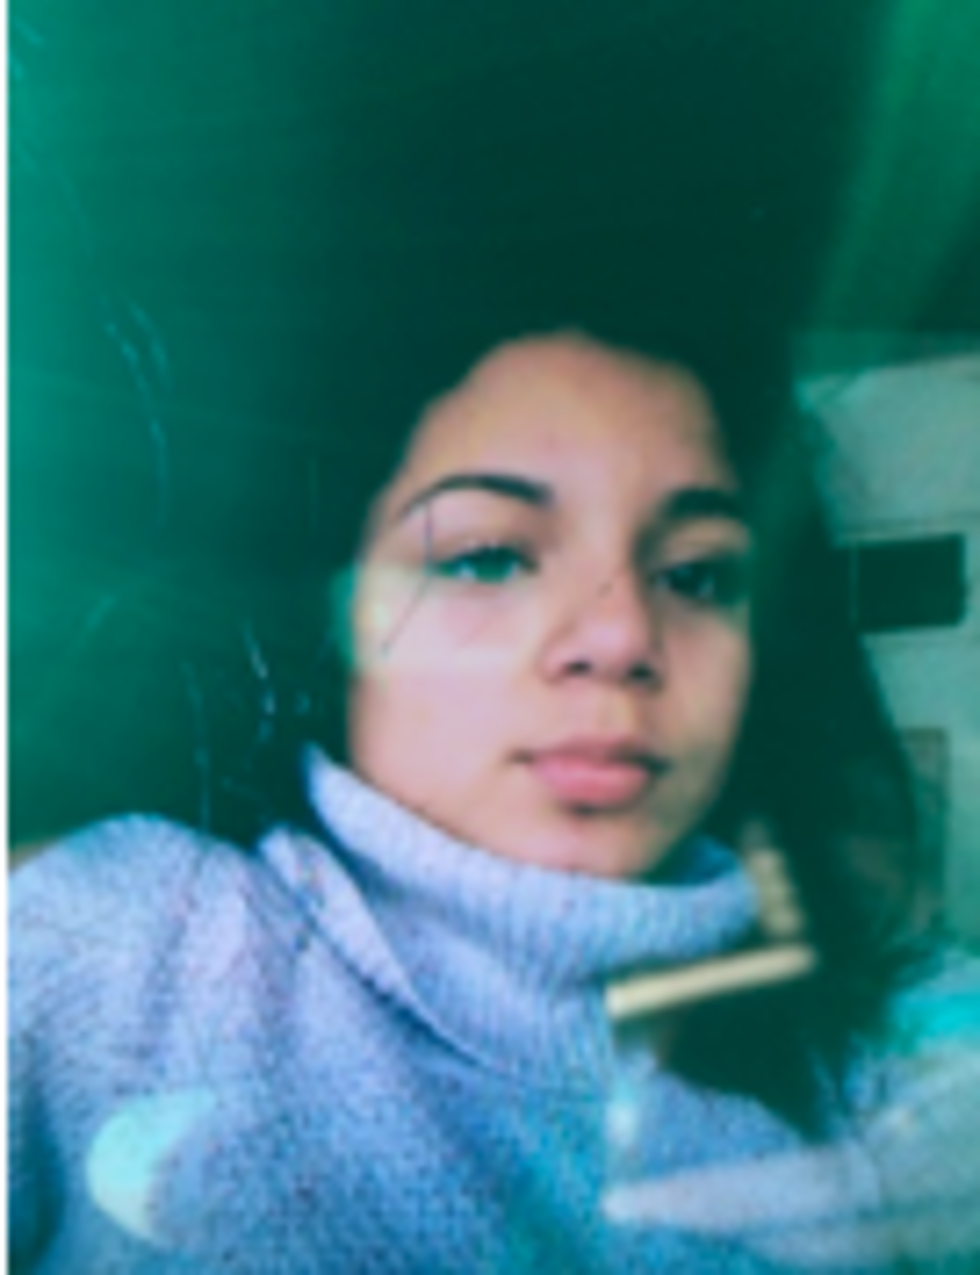 12:15 PM UPDATE: Camden County missing teenager found